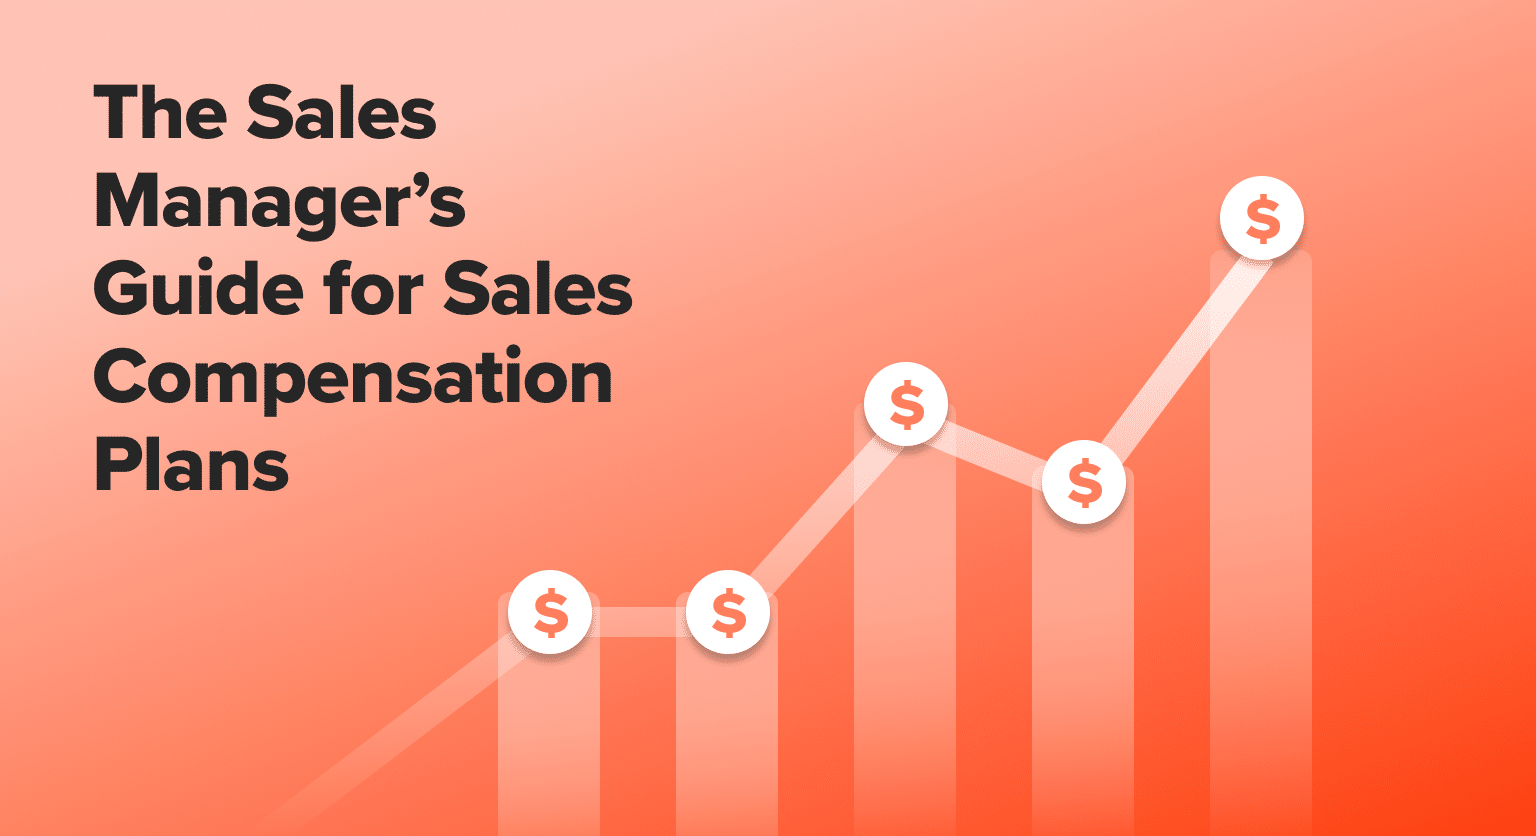 Discover the importance and key components of a sales compensation plan. Learn how to build and maintain a plan that drives growth